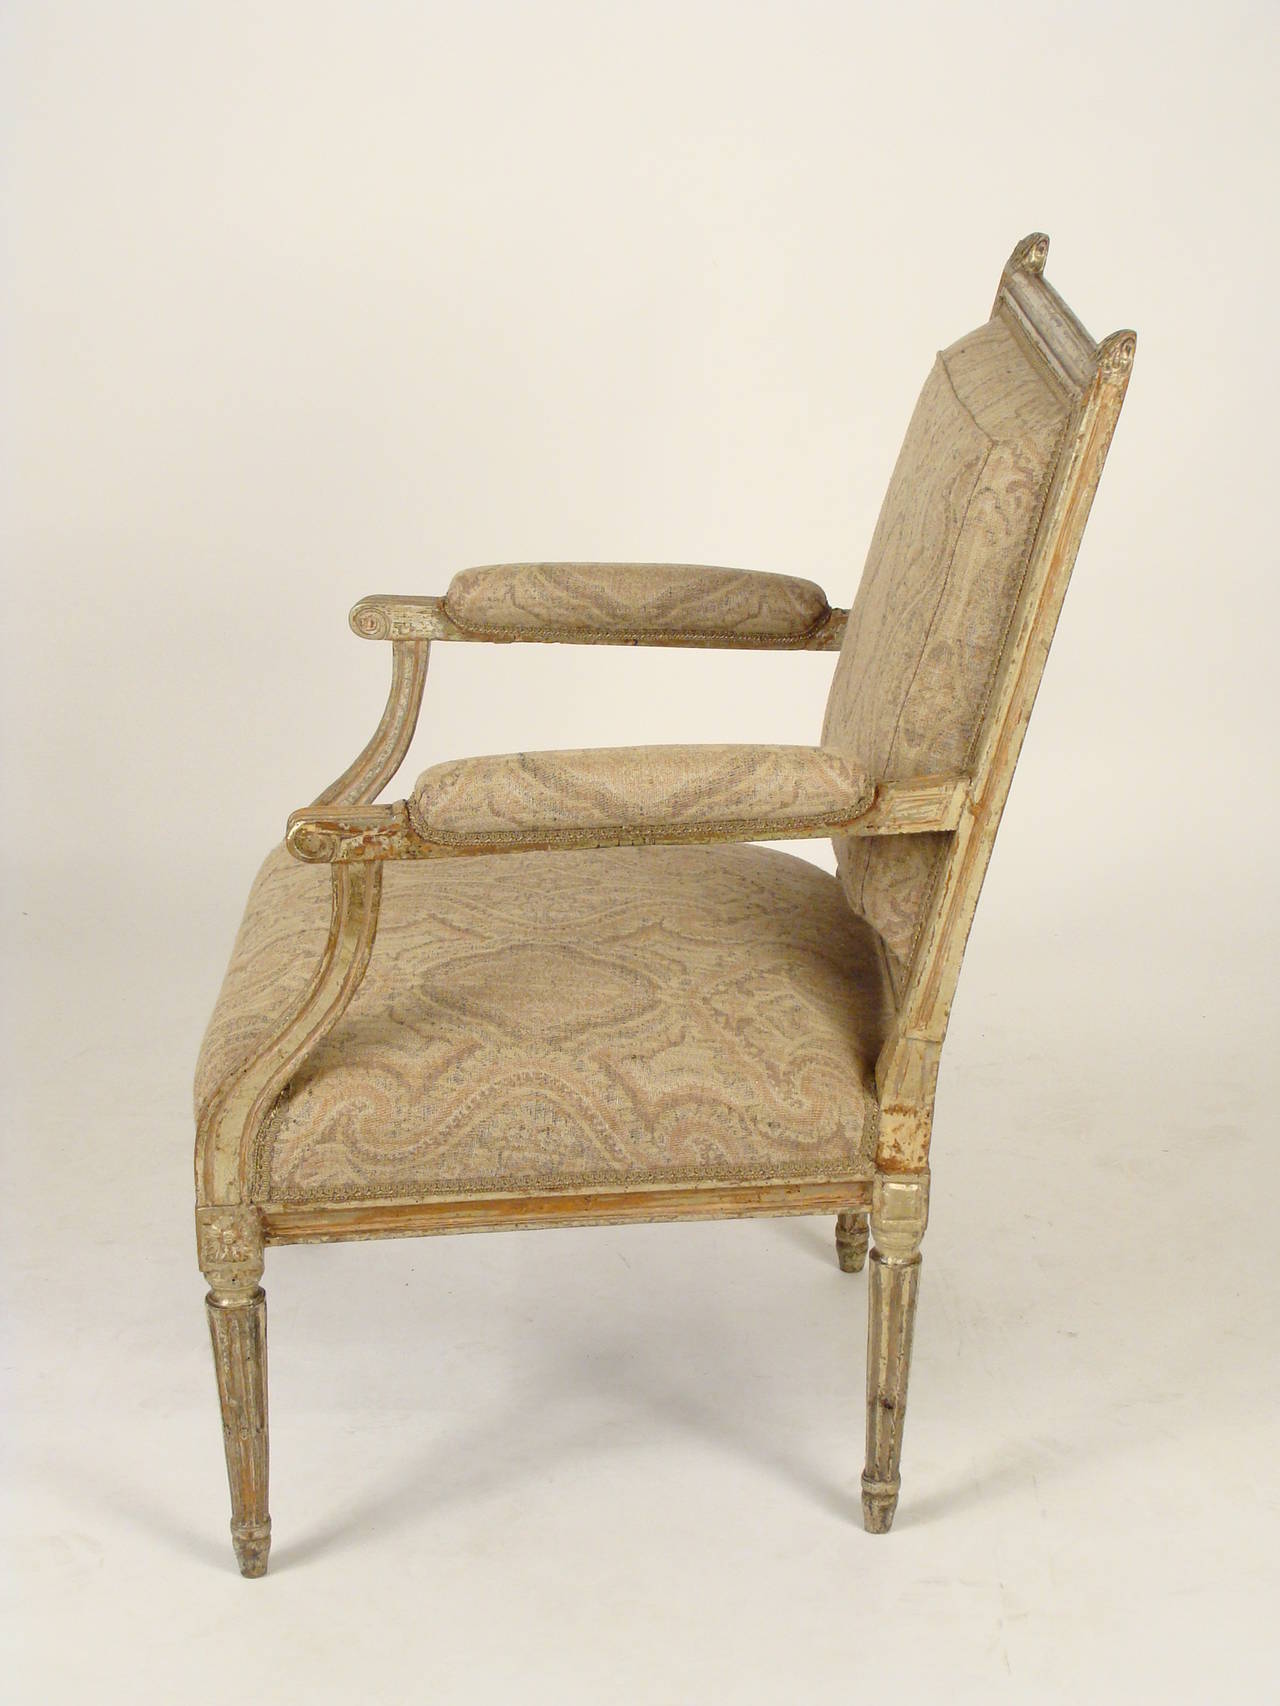 Louis XVI style silver leaf and painted open armchair, 19th century.